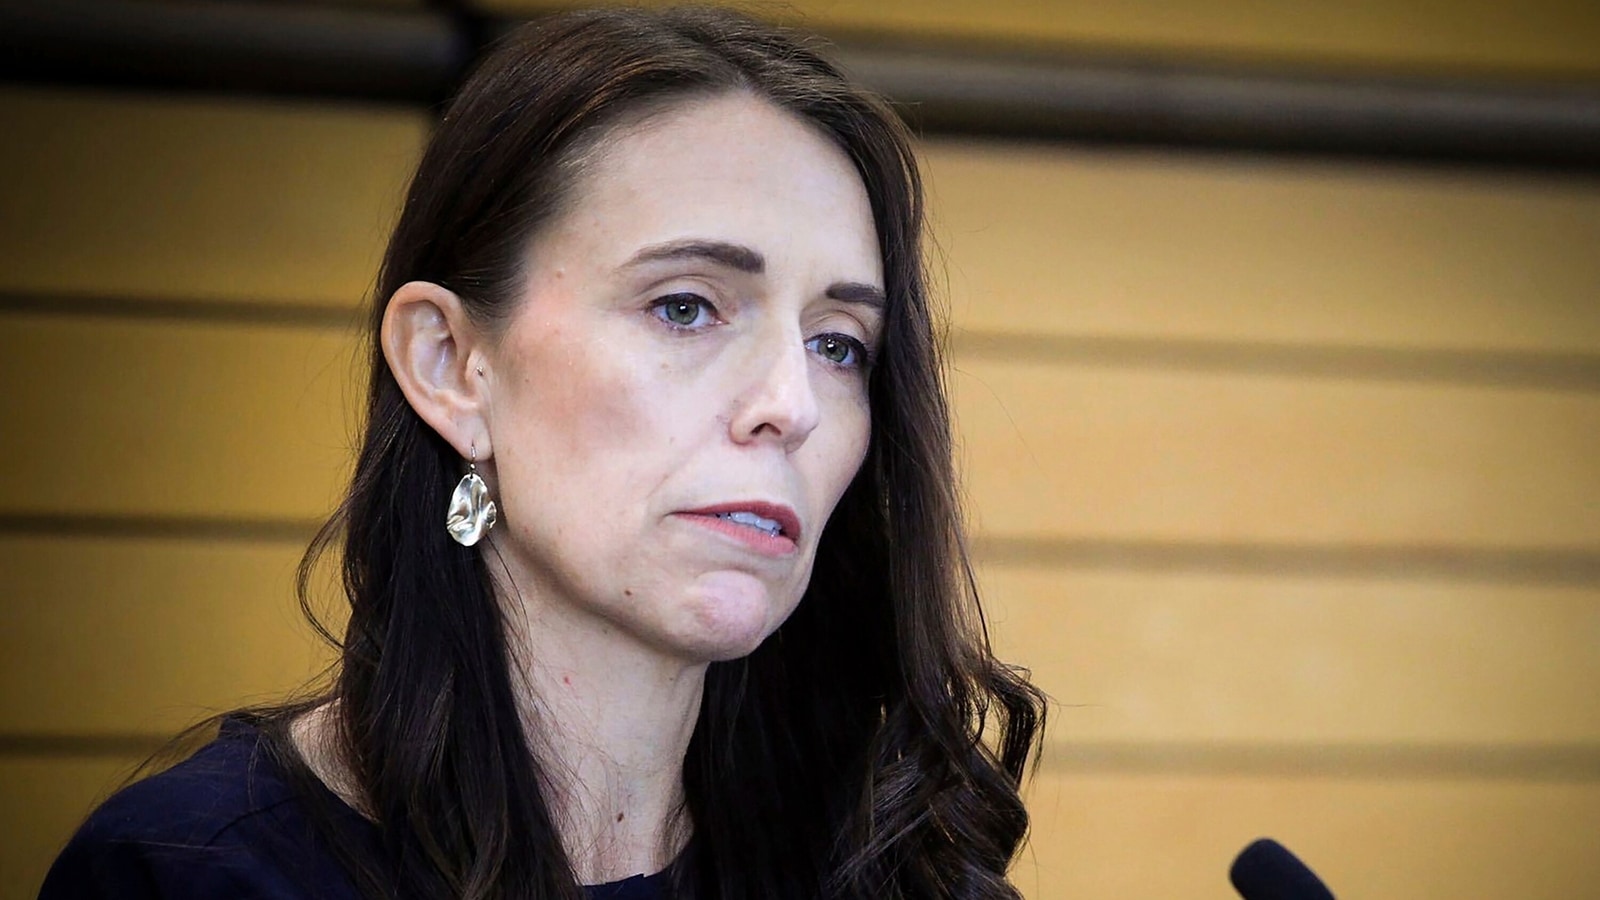 Jacinda Ardern closes door on being New Zealand's leader: All you need to know